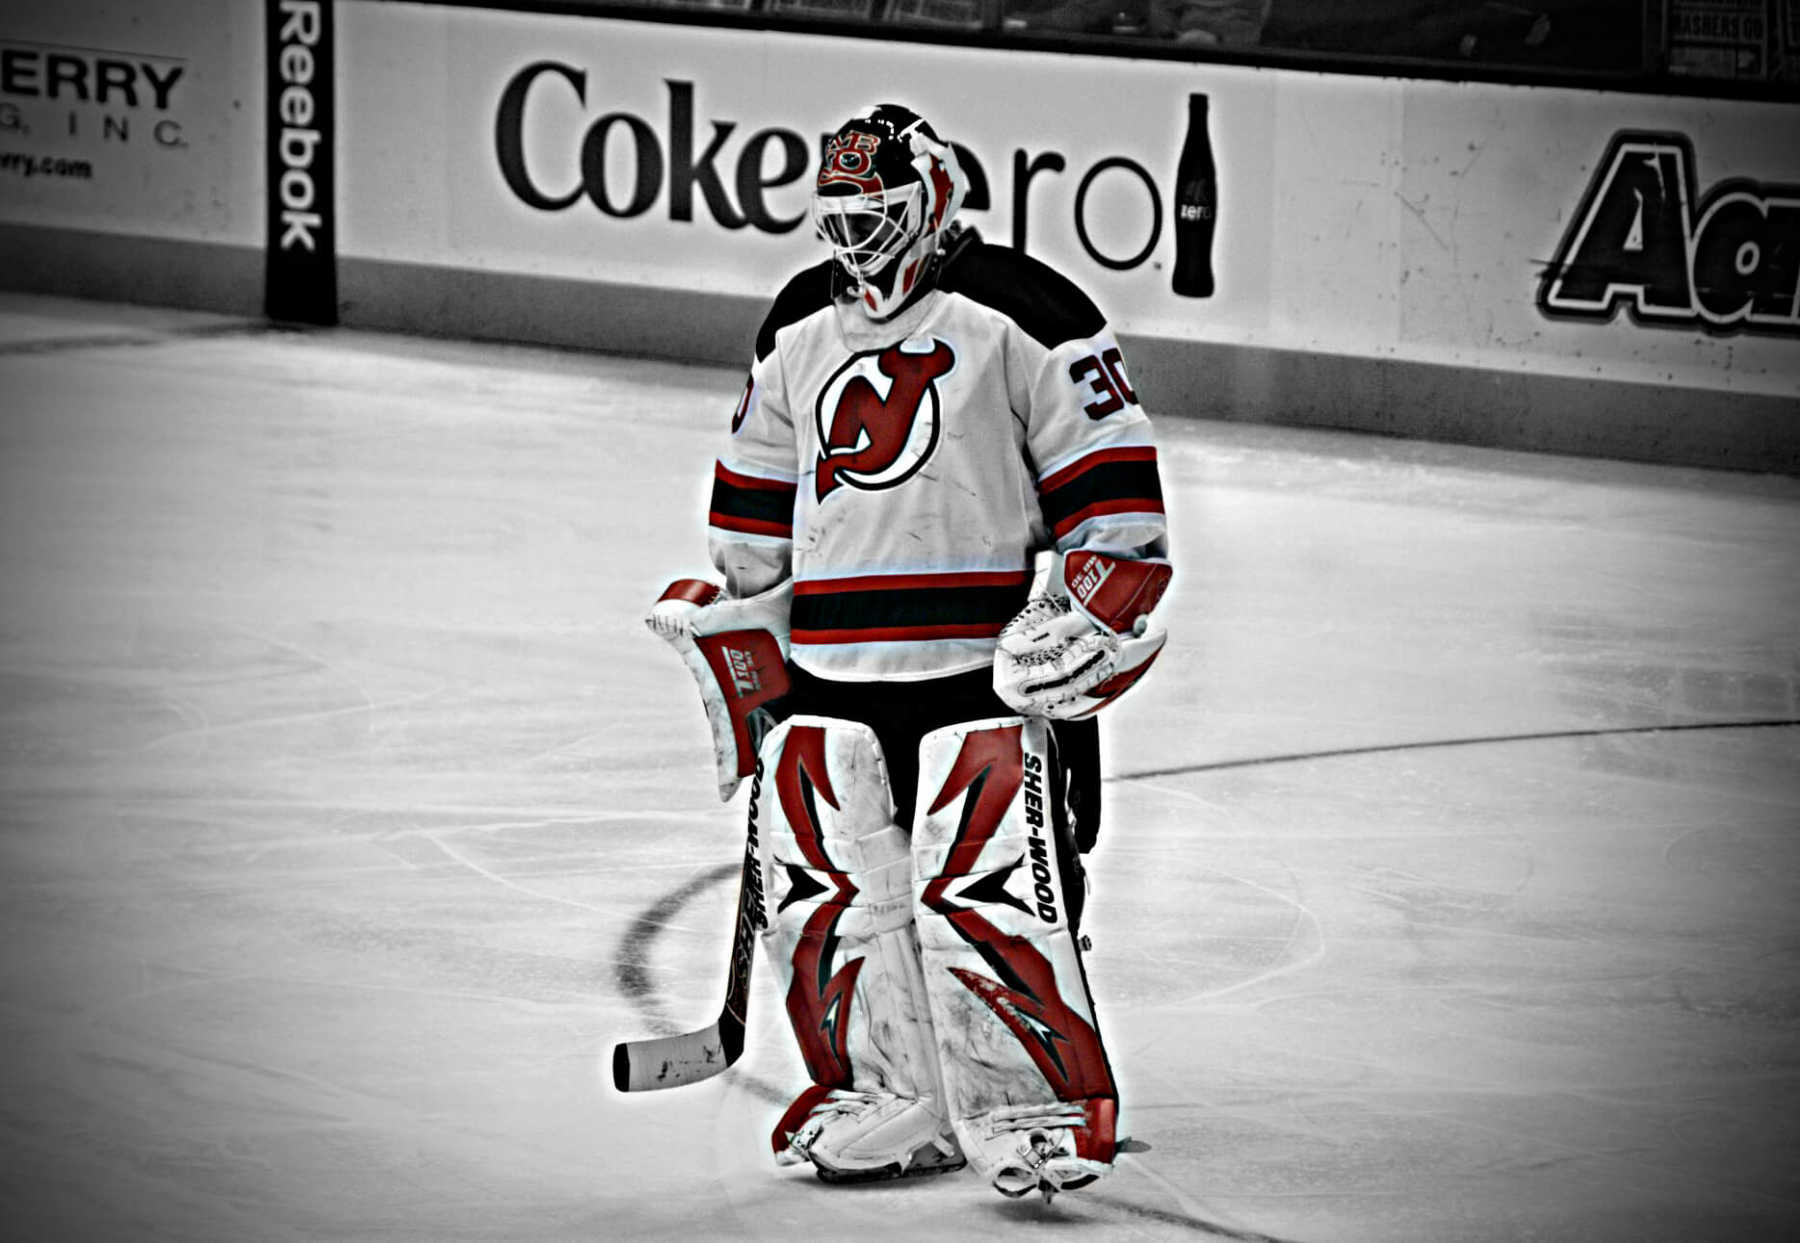 Martin Brodeur Played the Position Like No One Else - All About